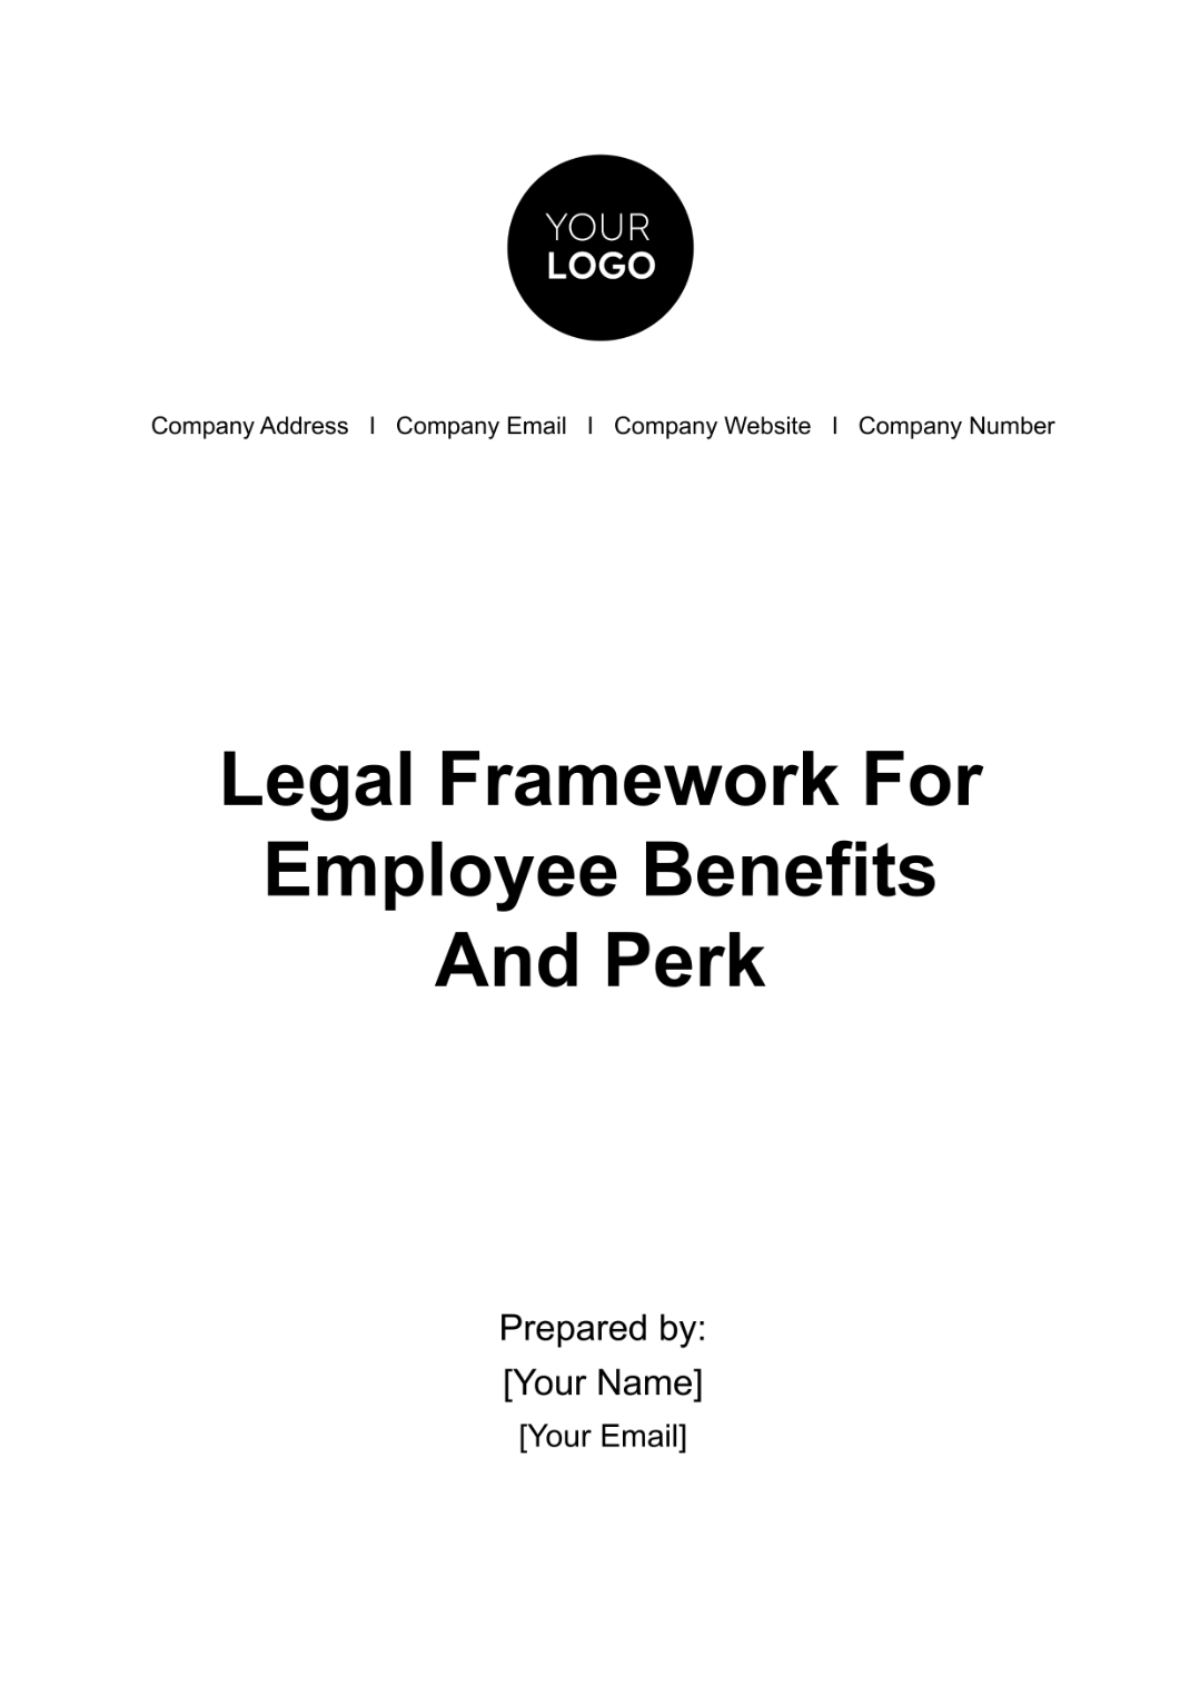 Free Legal Framework for Employee Benefits and Perks HR Template